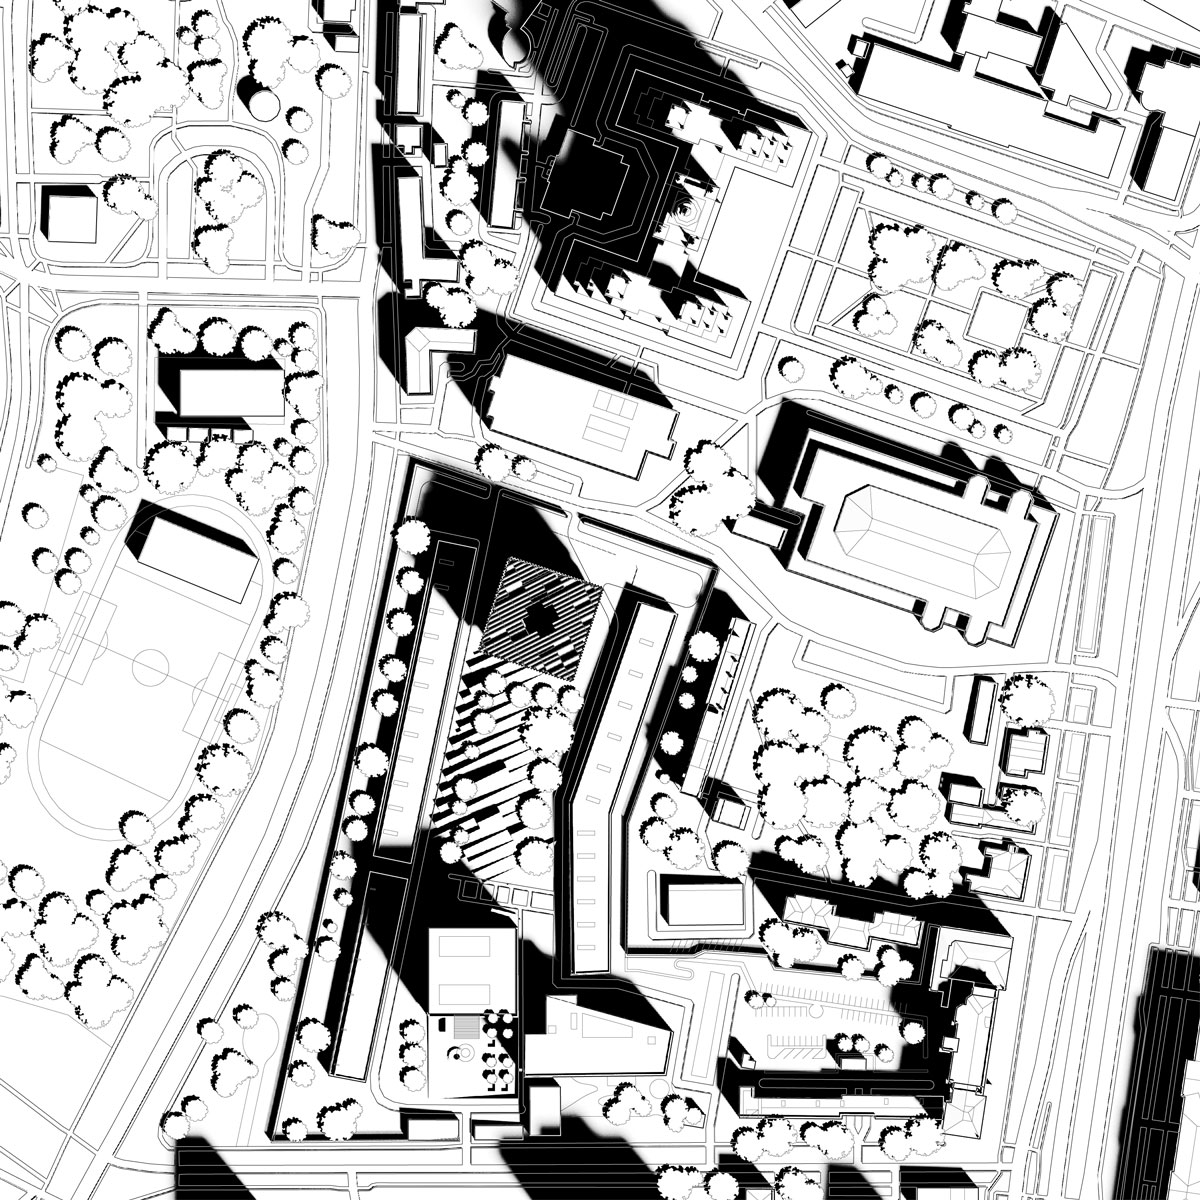 Image of the site plan of the embassy compound, with the new chancery to the north